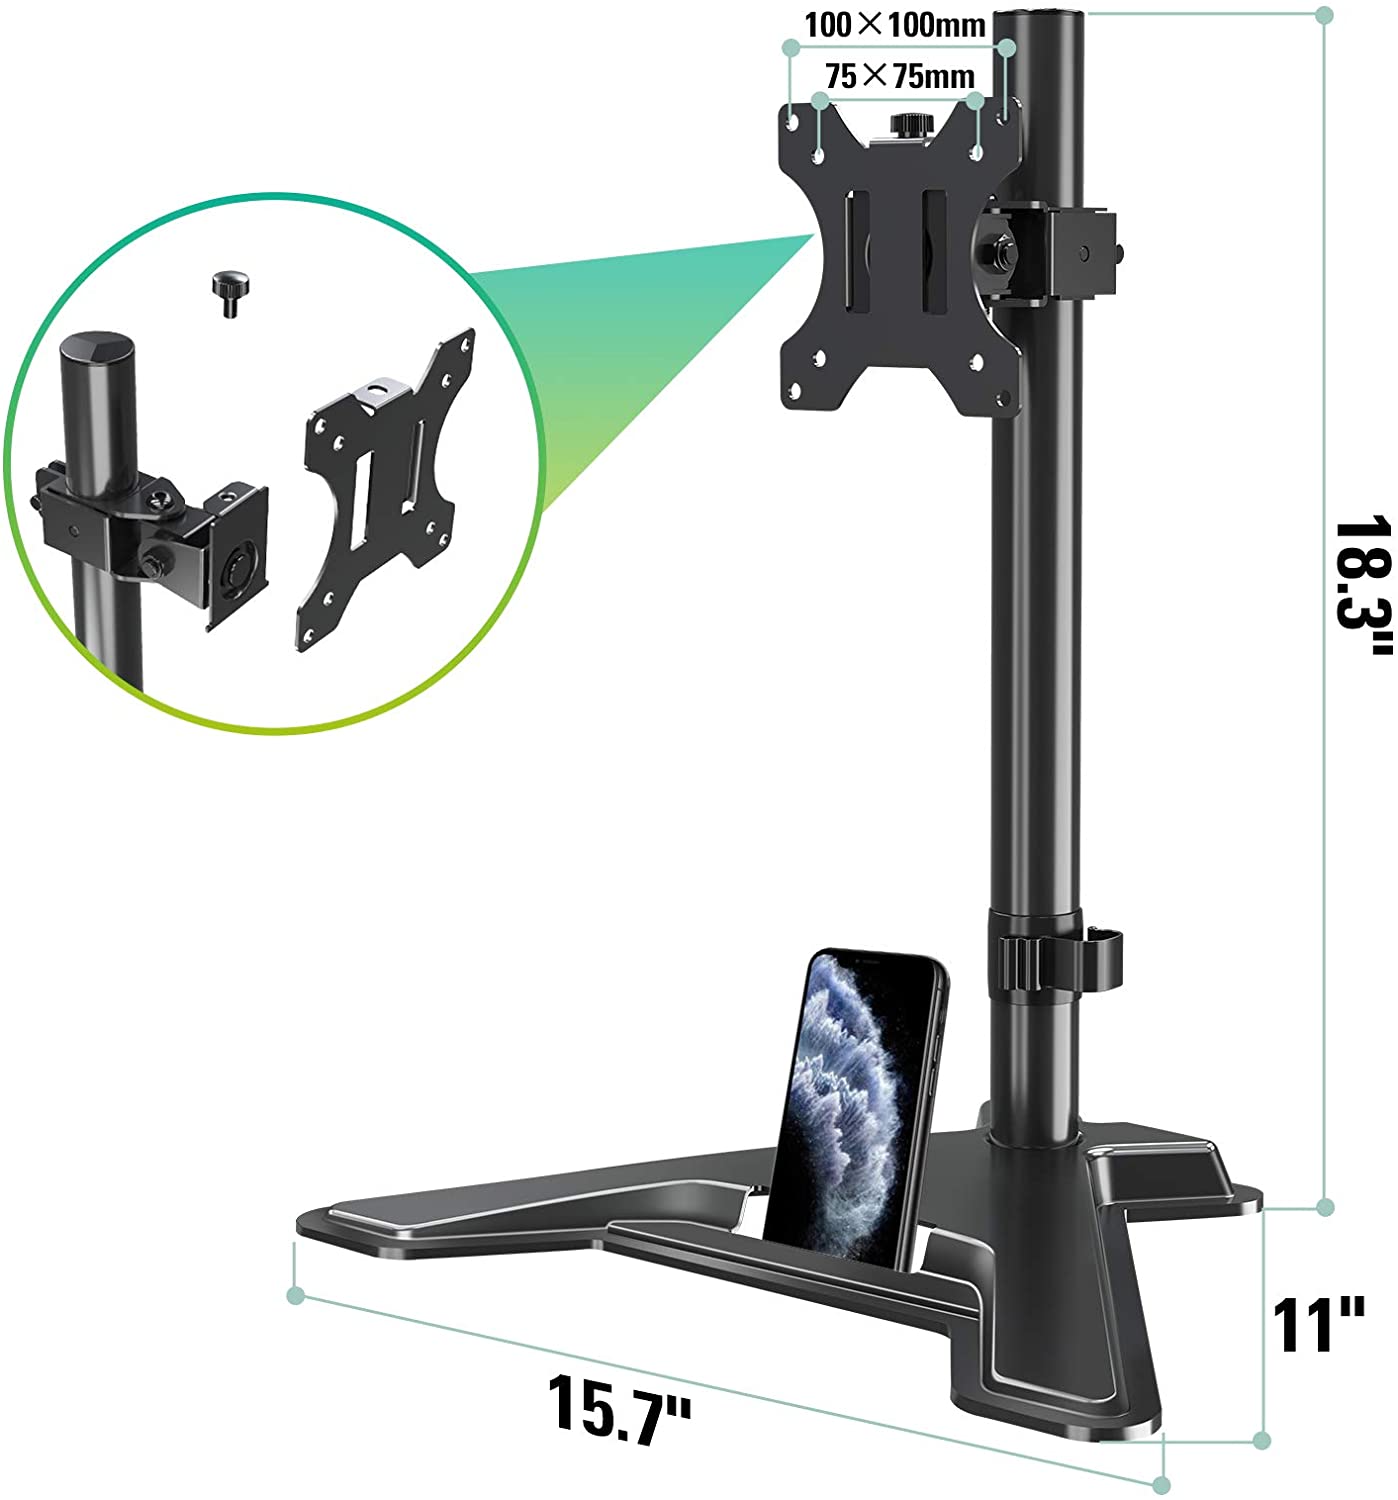 Single Arm height adjustable computer monitor desk for 75×75 and 100×100 vesa hole pattern